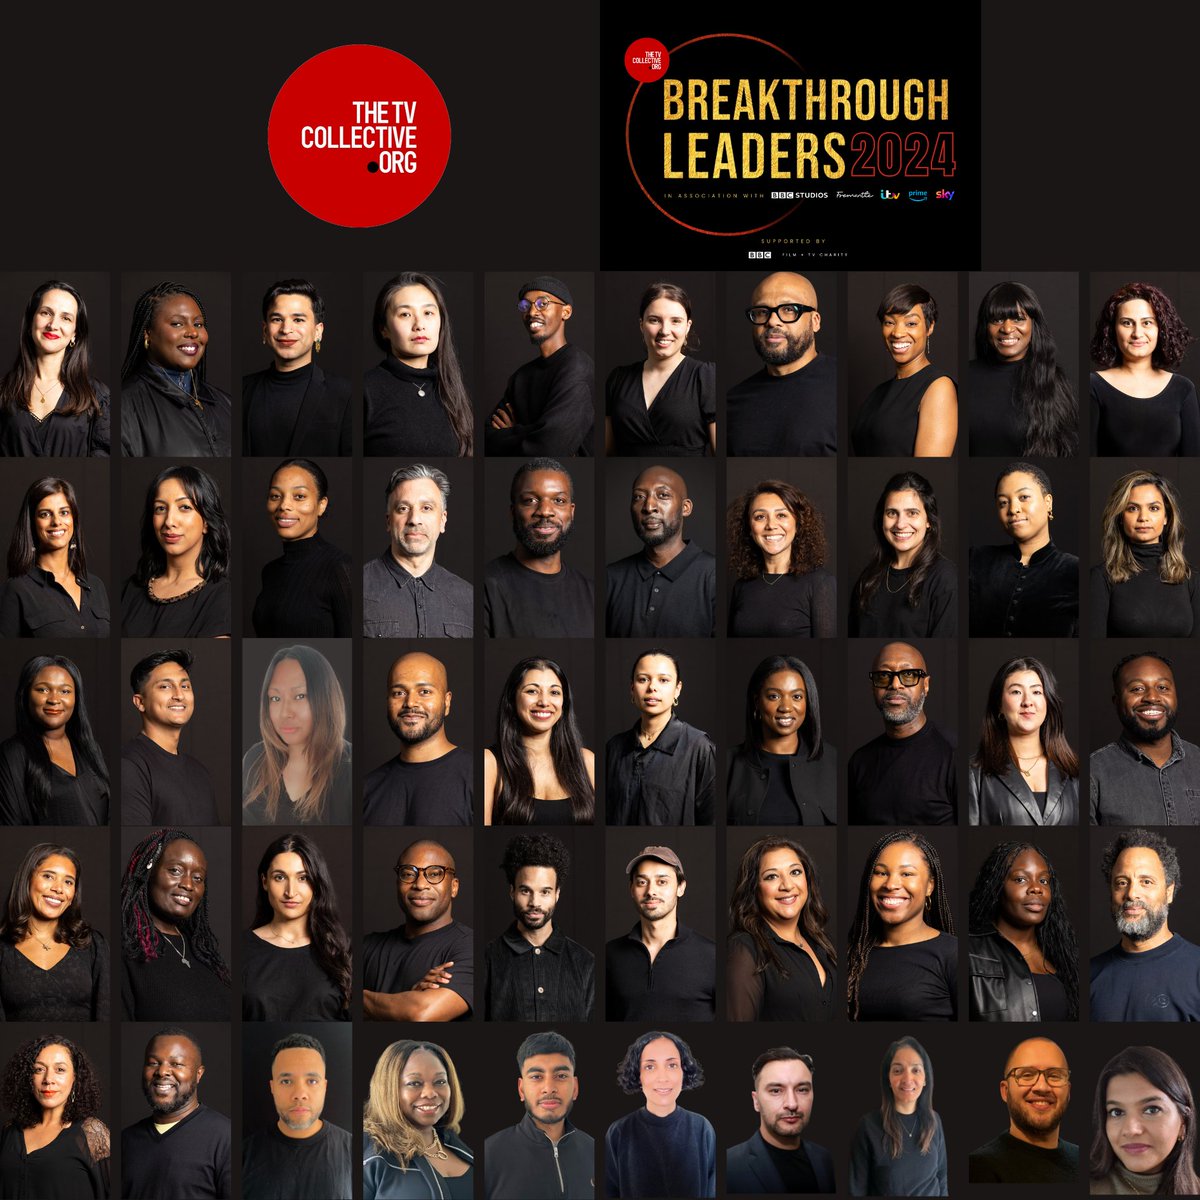 Introducing our NEW 50 Breakthrough Leaders, set to shape and redefine future leadership in the TV industry and drive positive change. Click the link in our bio to learn more about our Leaders! 🌟 #BreakthroughLeaders #TVIndustry #PositiveChange